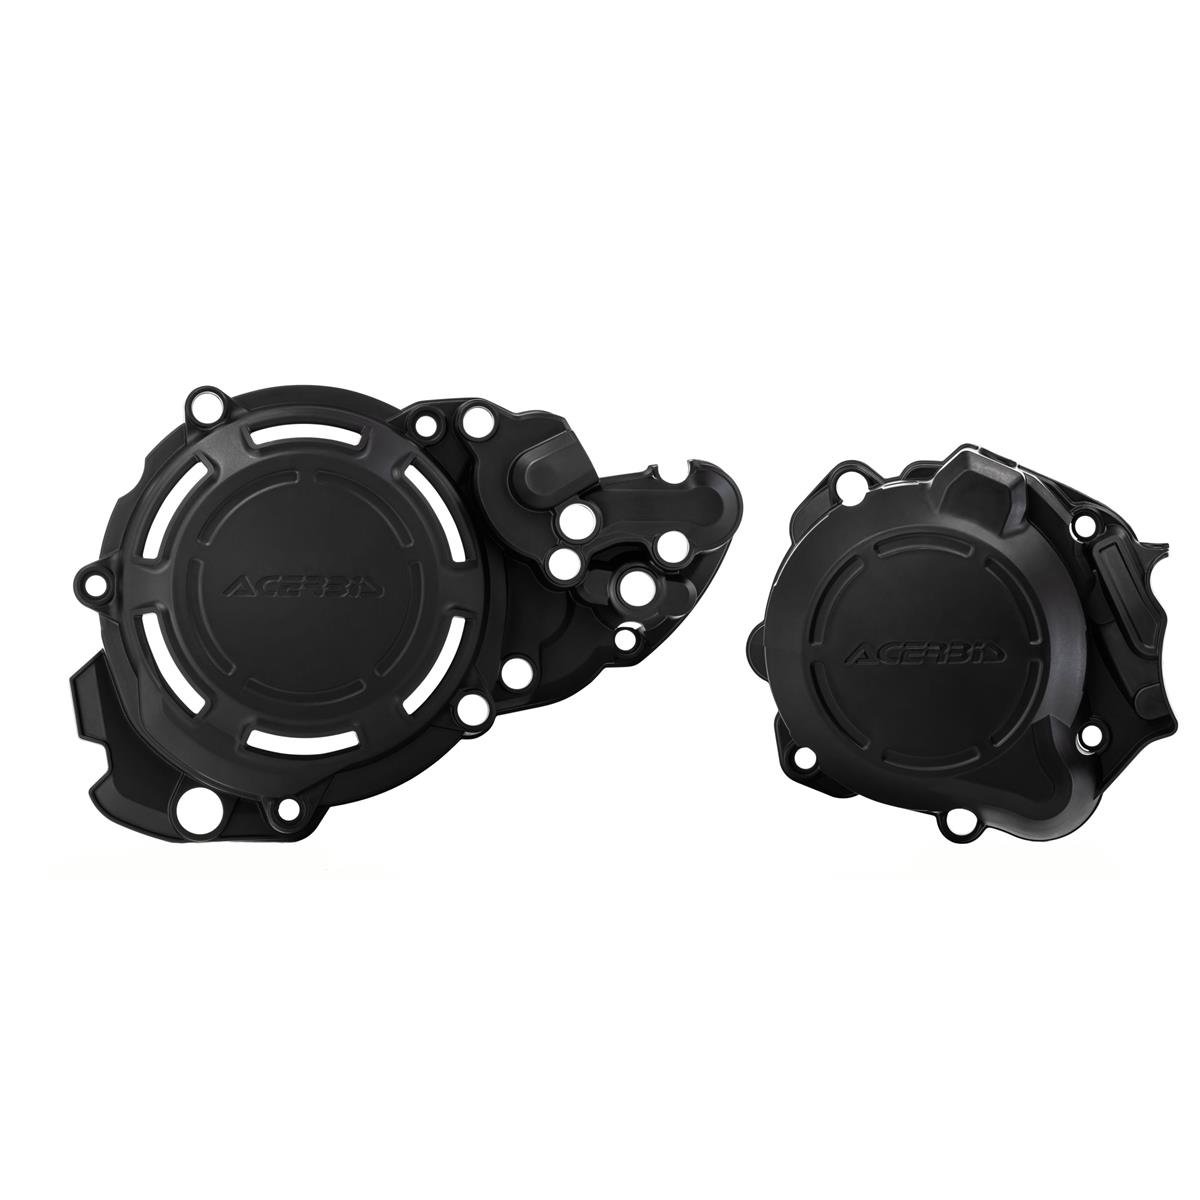 Acerbis Clutch/Ignition Cover Protection X-Power Beta RR 2T 250/300 18-, Black